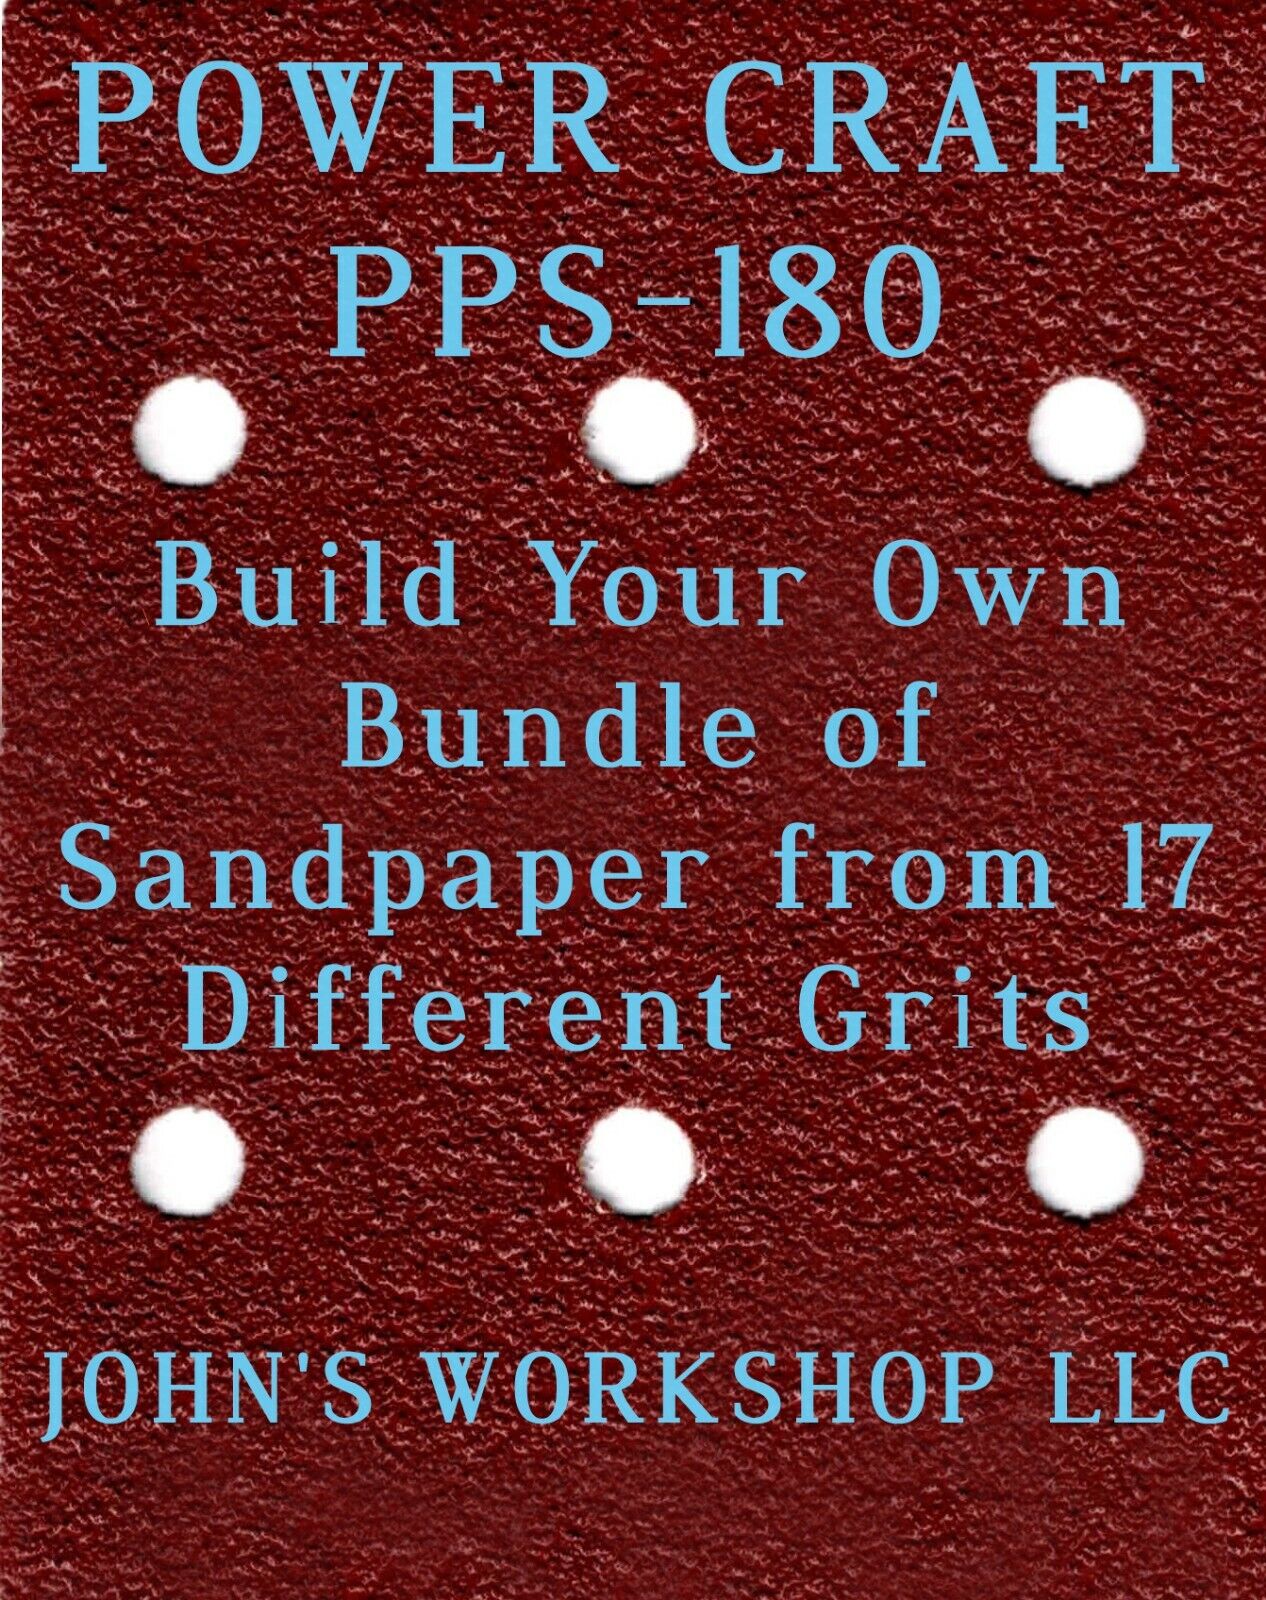 Build Your Own Bundle of POWER CRAFT 1 No-Slip S Animer and depot price revision Sheet PPS-180 4